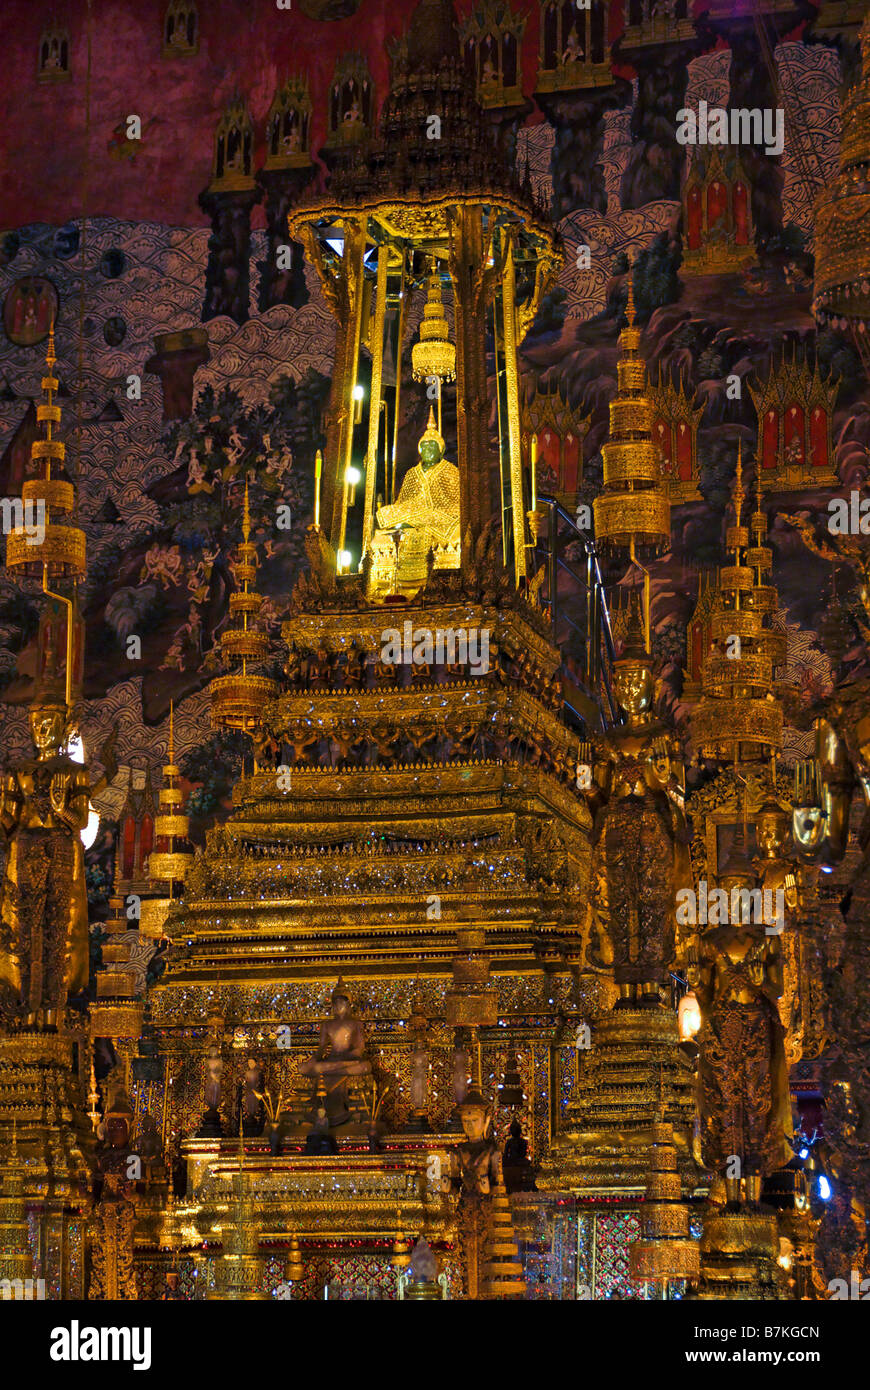 The Emerald Buddha inside Ubosot temple - Wat Phra Kaew and the Grand Palace in central Bangkok Thailand Stock Photo